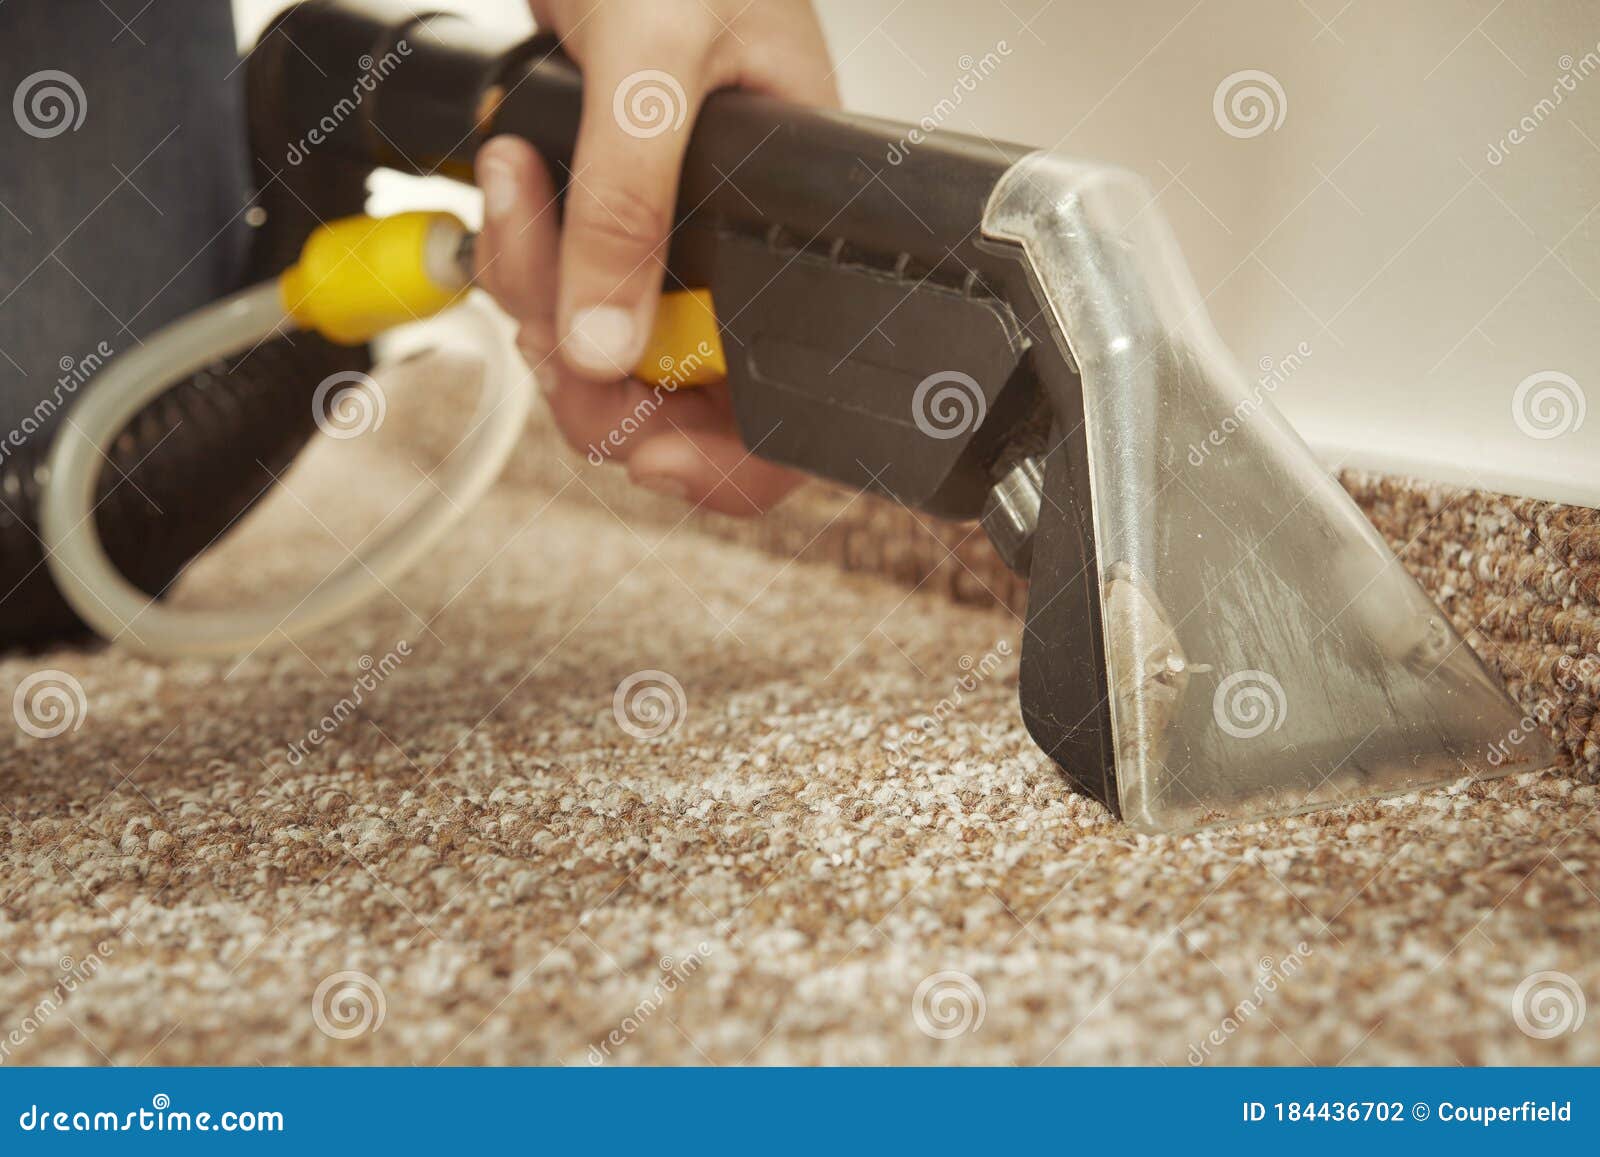 Detail of Cleaning Carpet on Floor with Wet and Dry Vacuum Cleaner